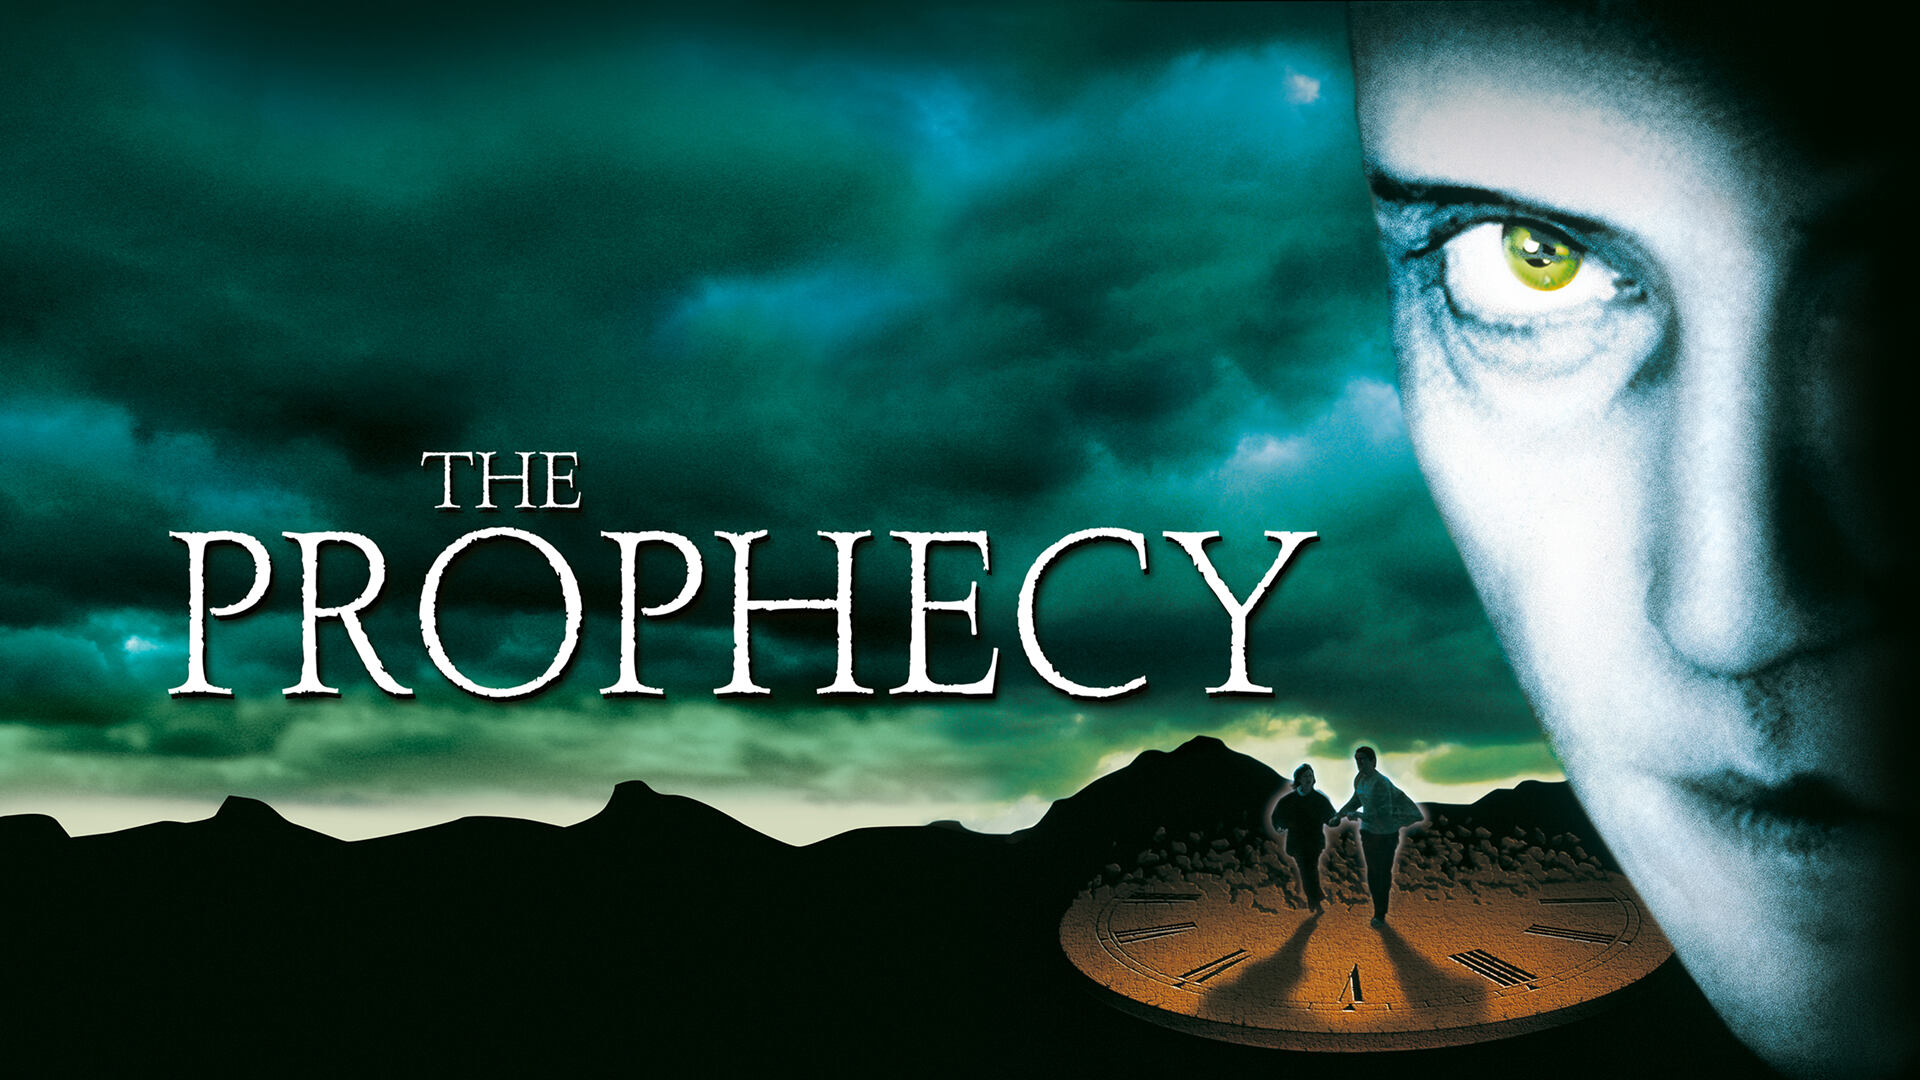 42-facts-about-the-movie-the-prophecy